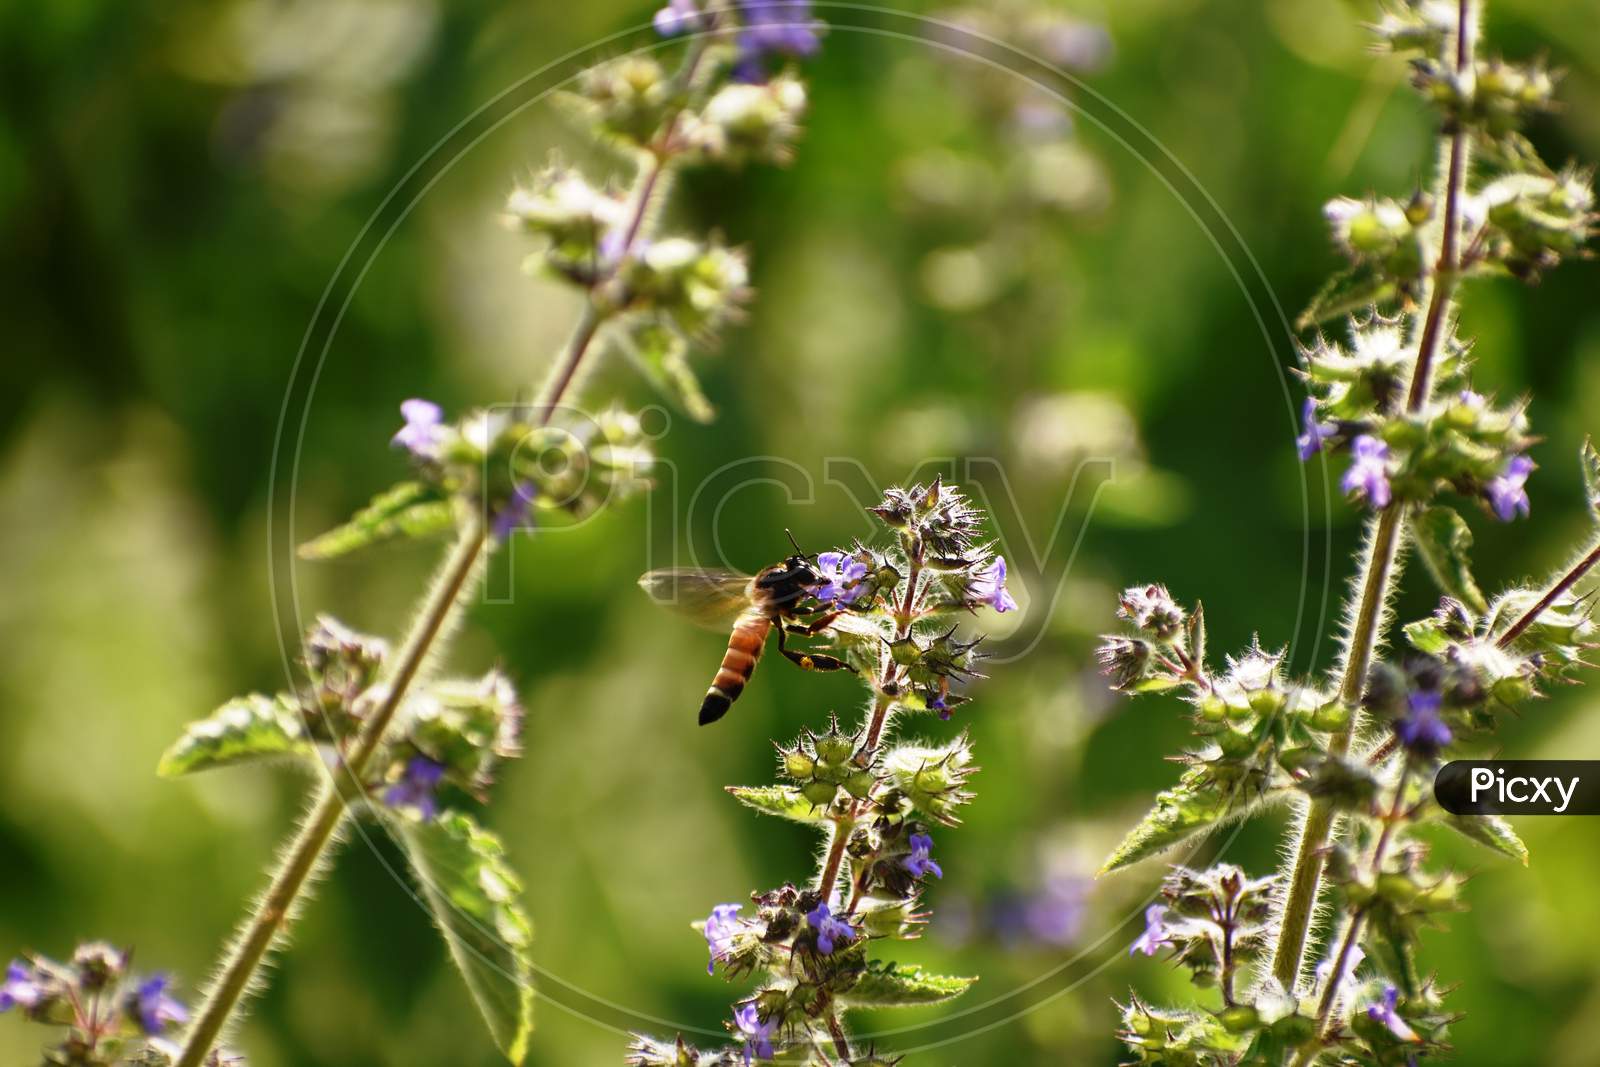 Honey Bee collecting nectar from the weed Flower